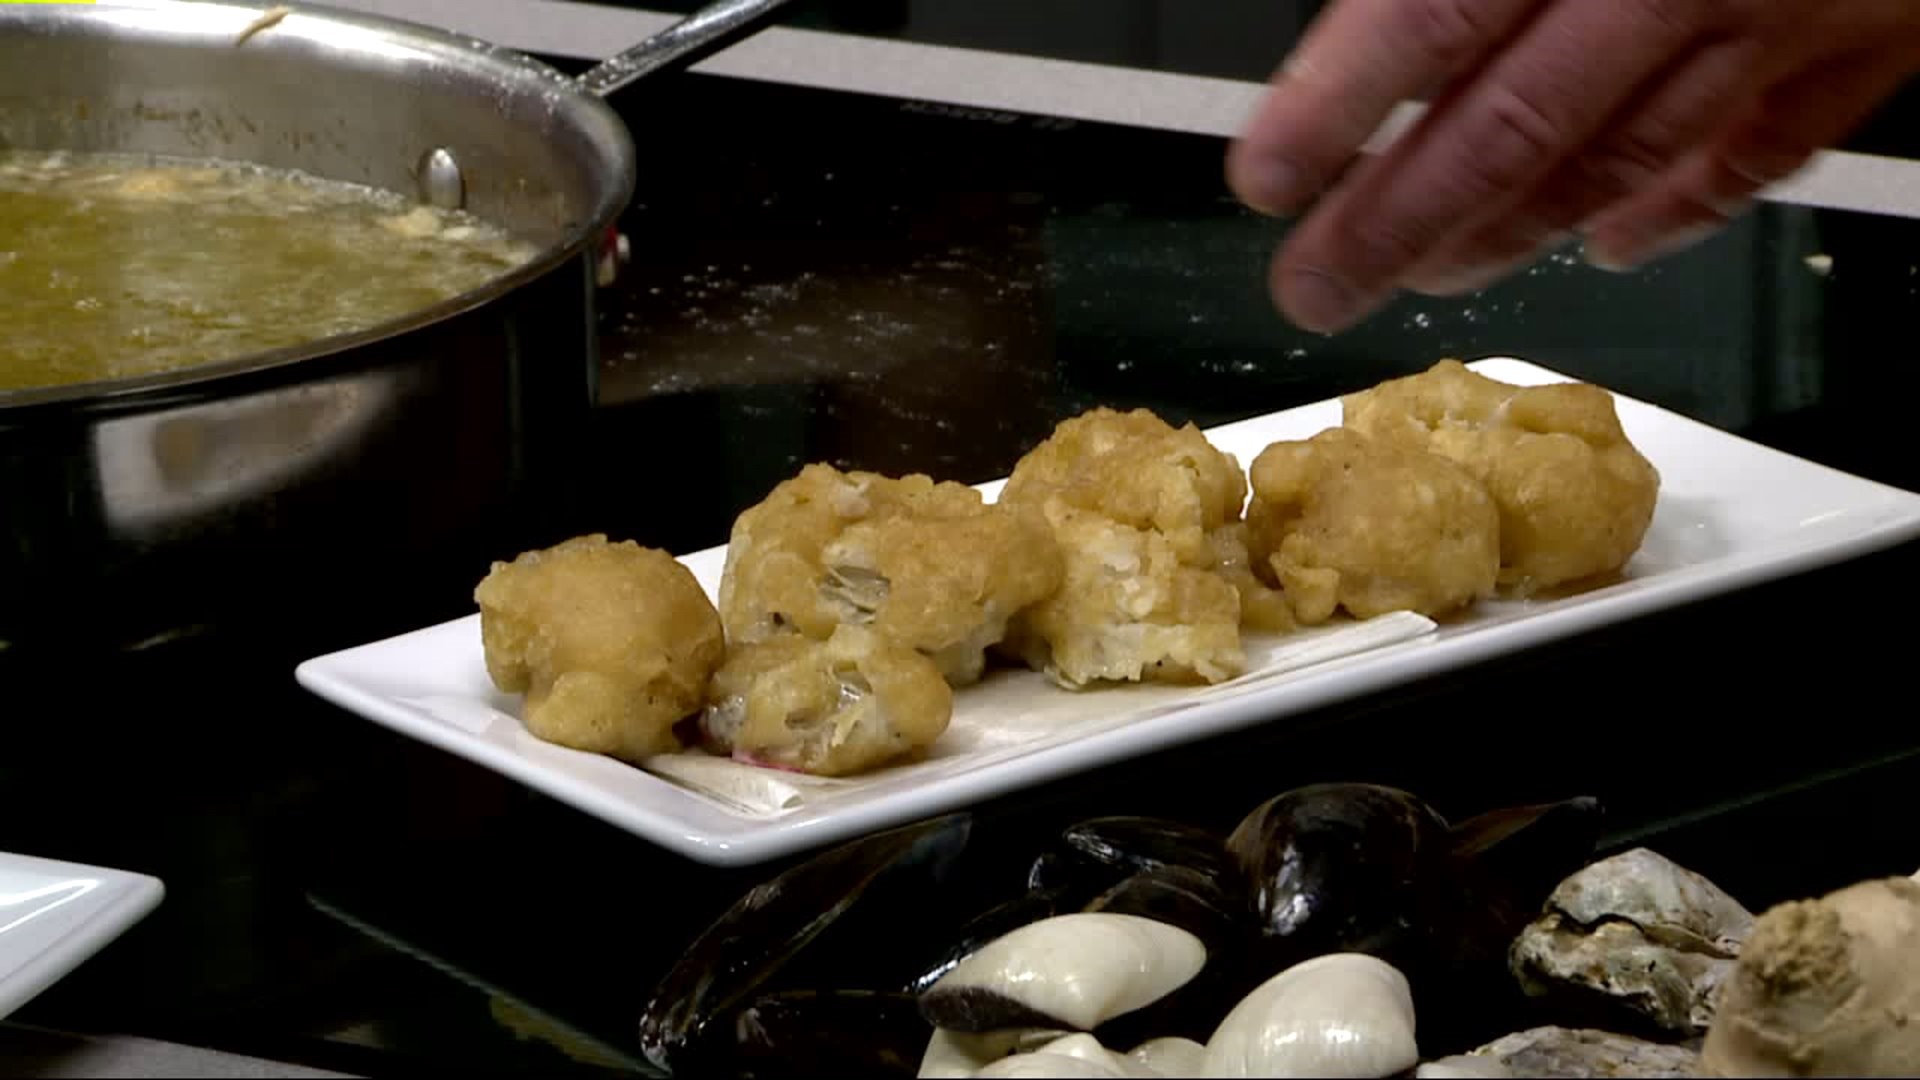 Yuengling Battered Oysters with an Asian twist presentation